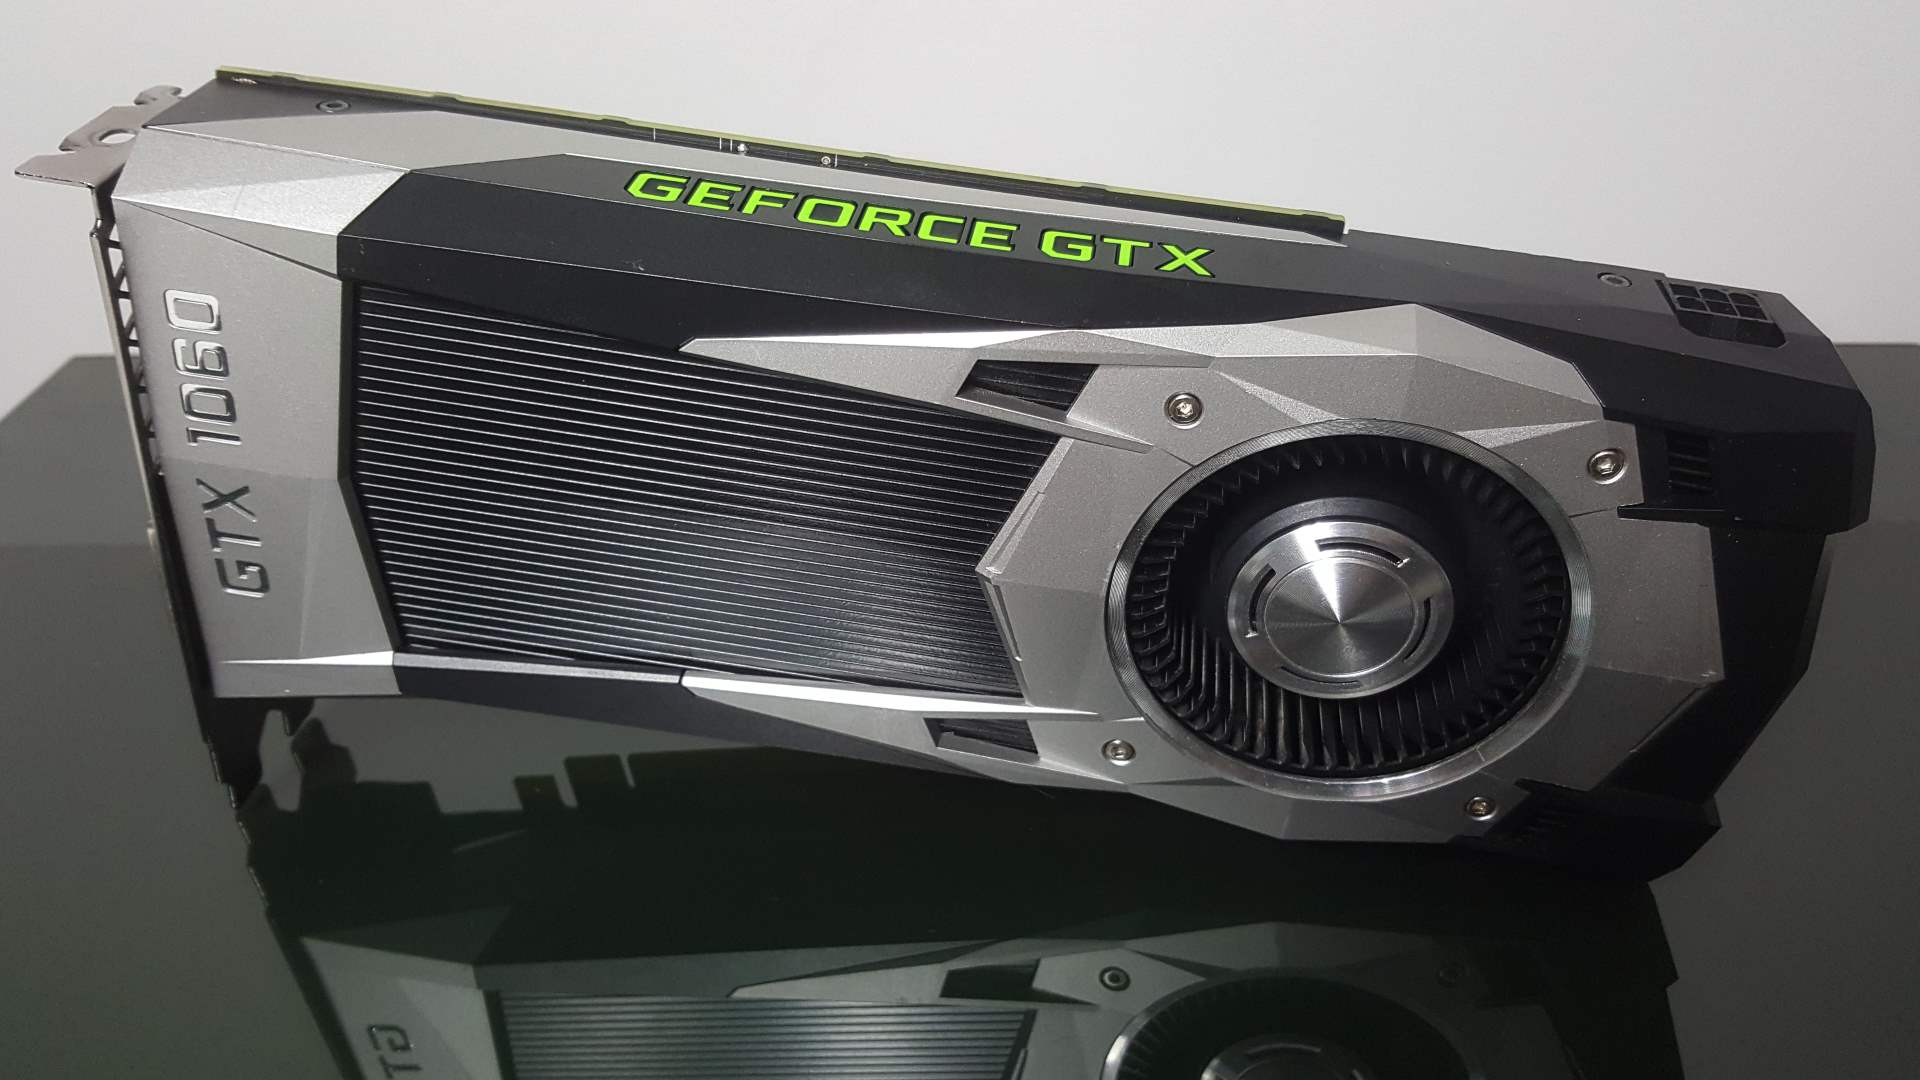 Nvidia’s RTX Voice tech quietly enabled on GeForce GTX graphics cards